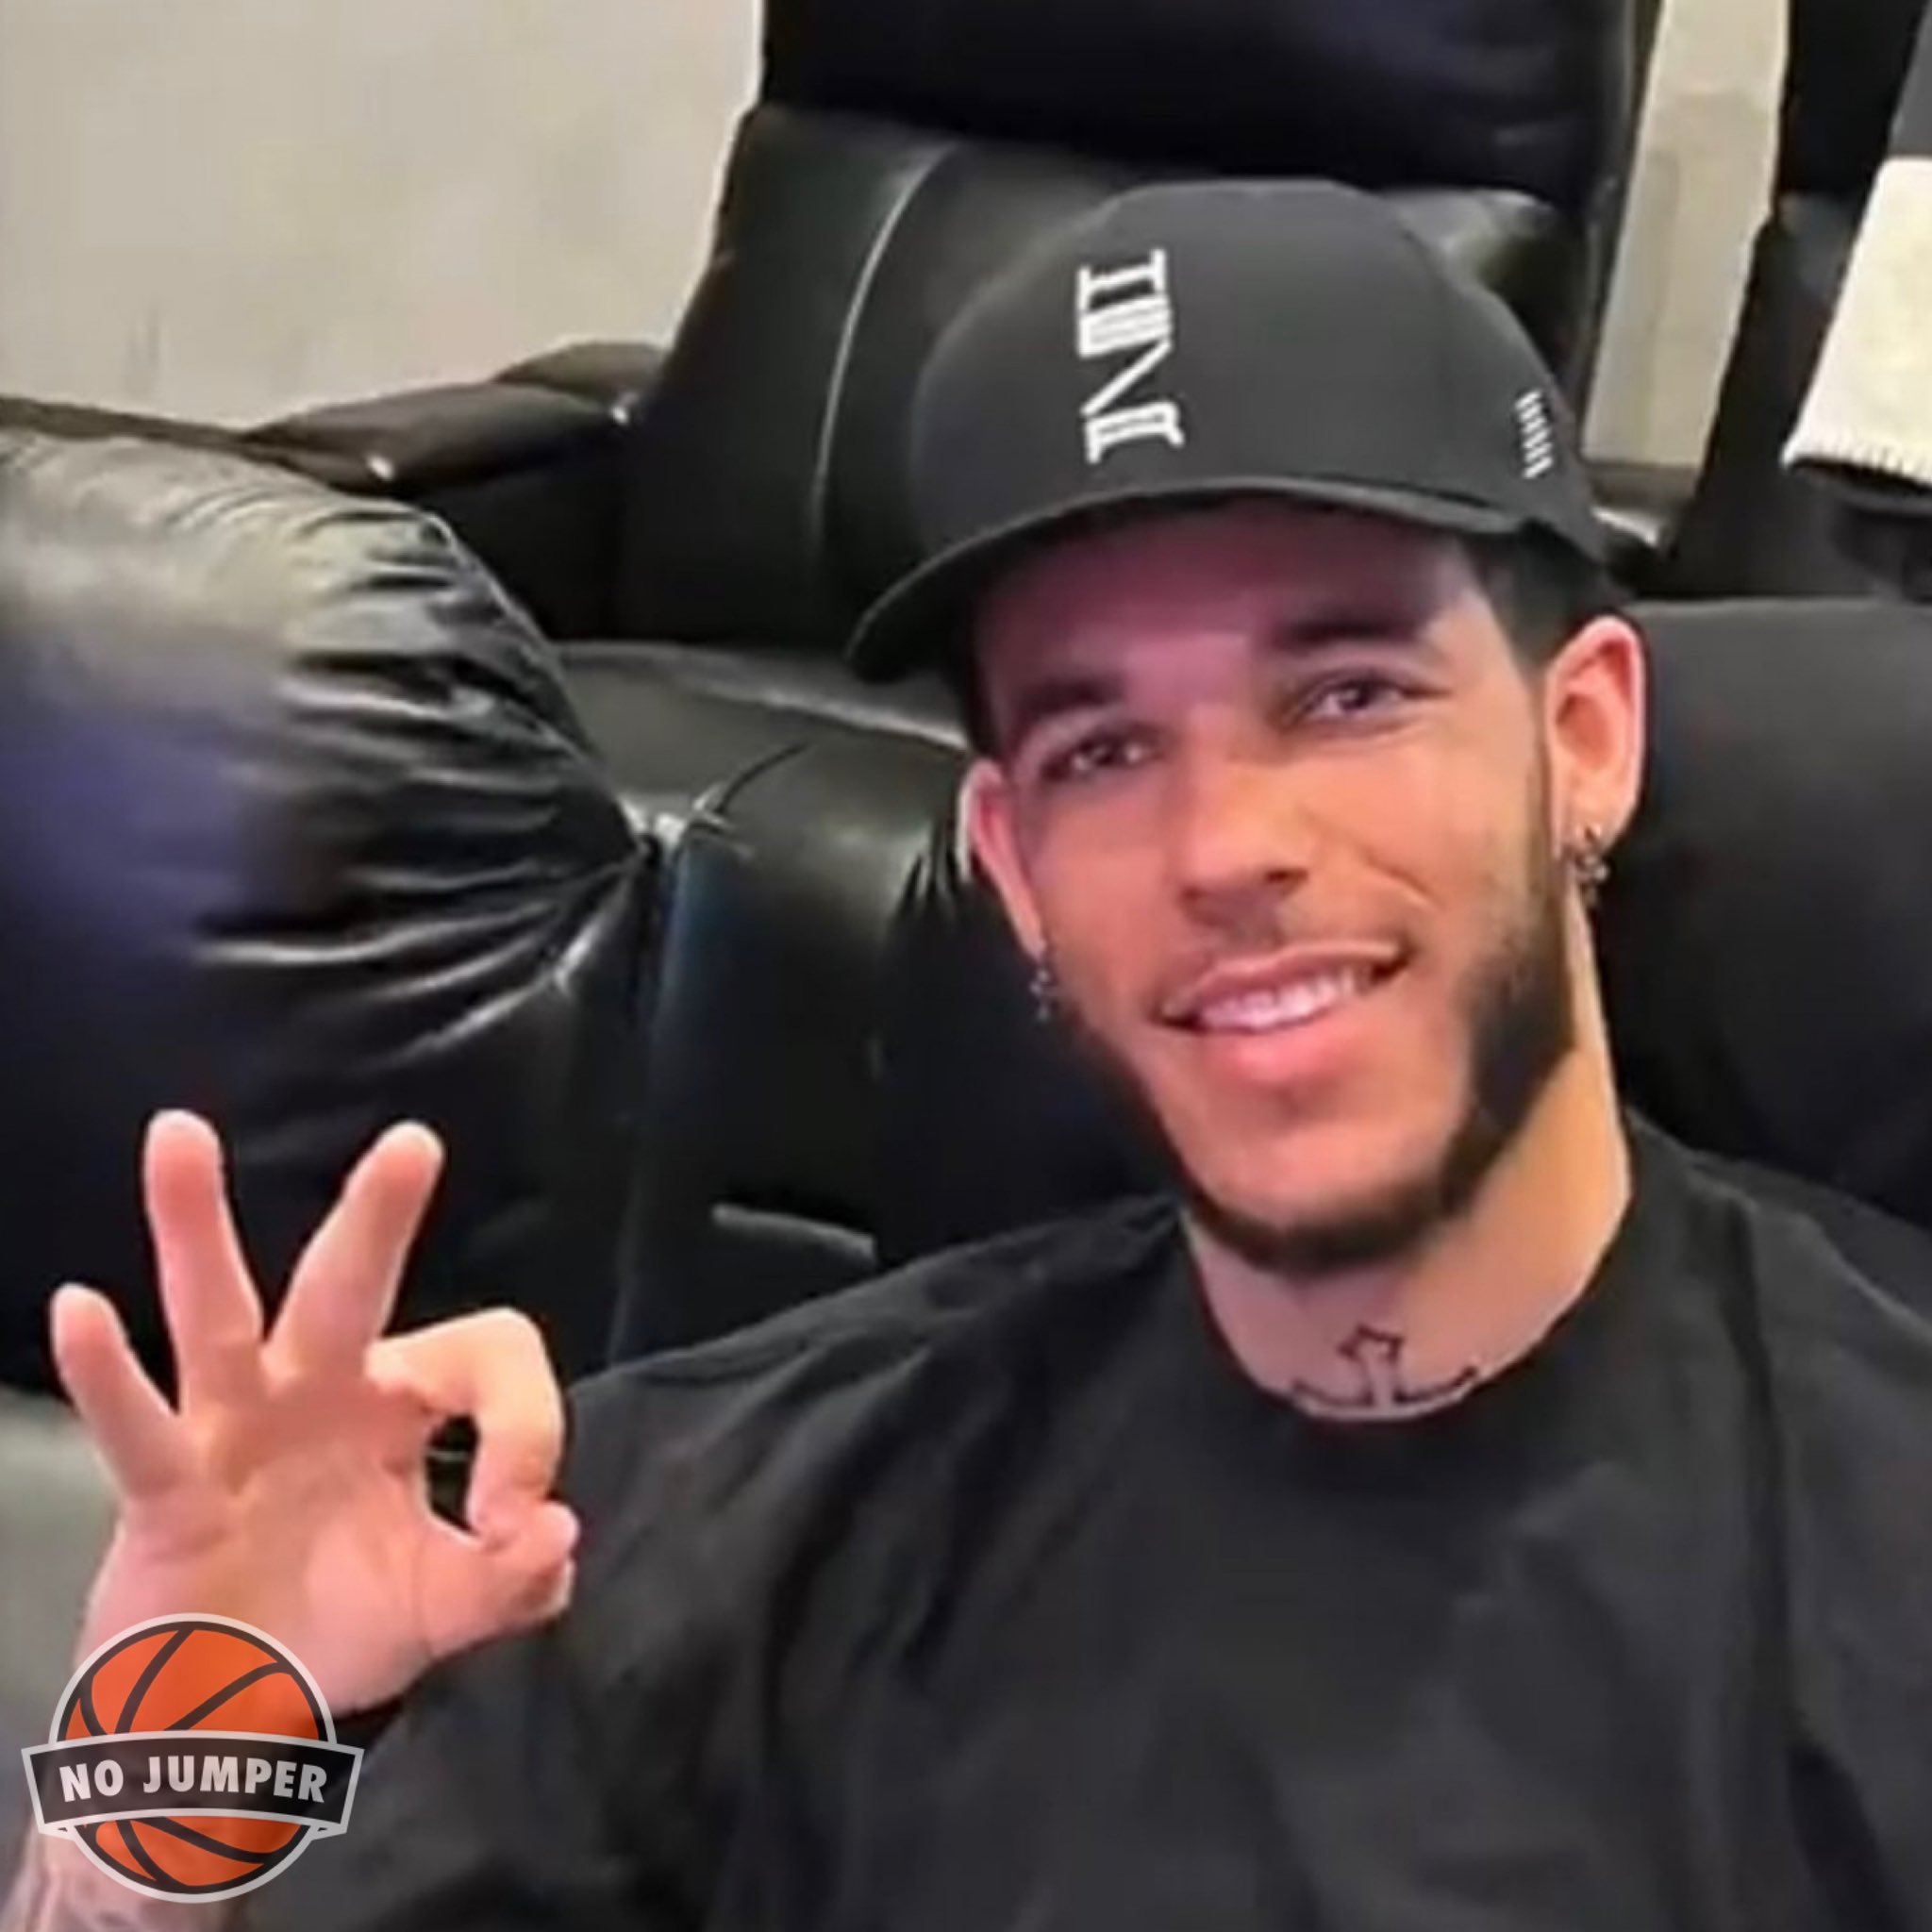 The Chicago Bulls Privately Believe Lonzo Ball Will Never Play